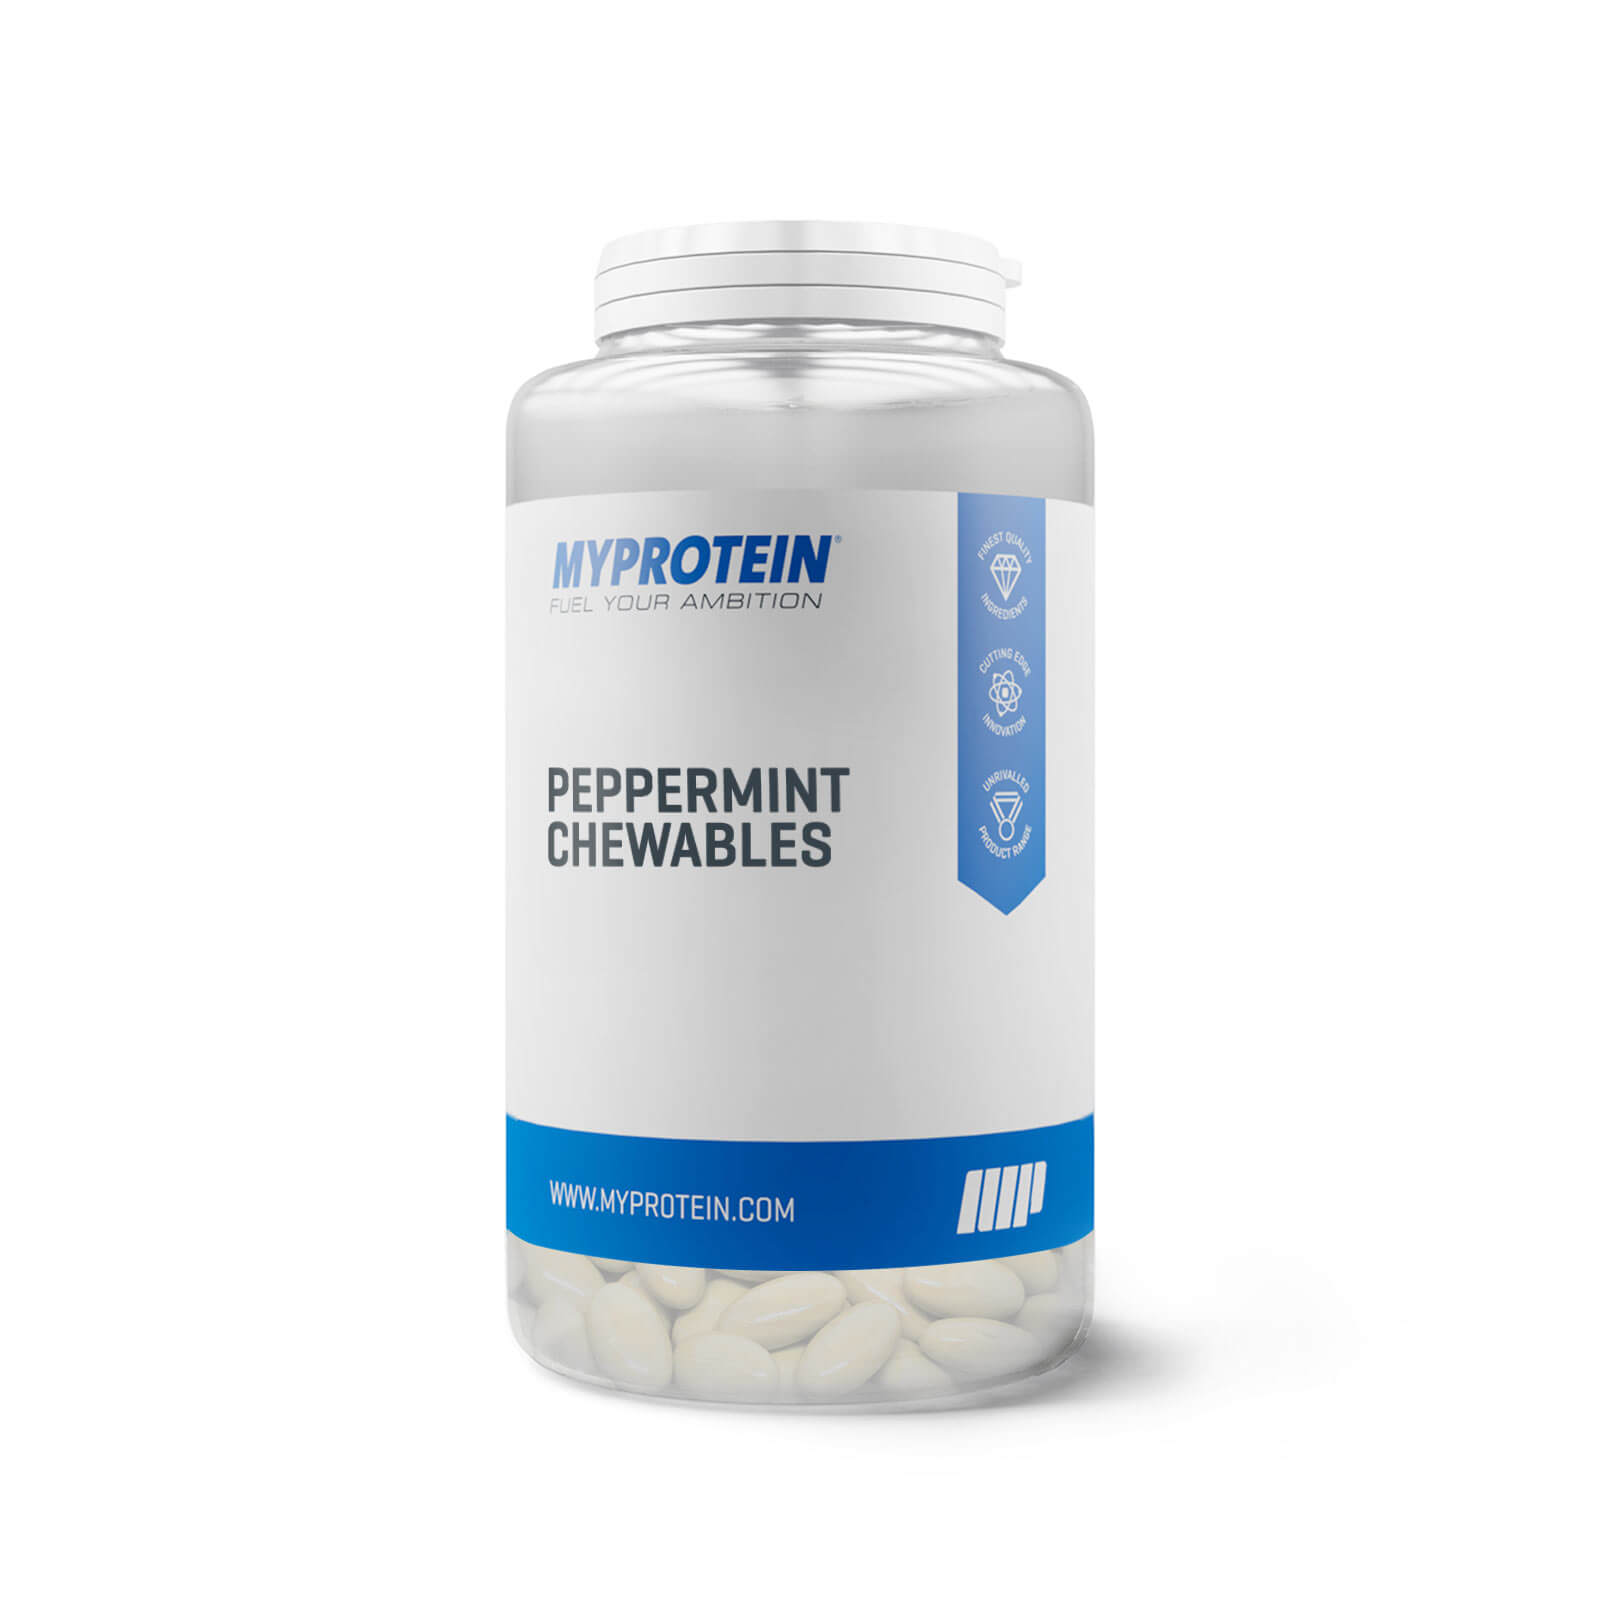 Peppermint Chewables